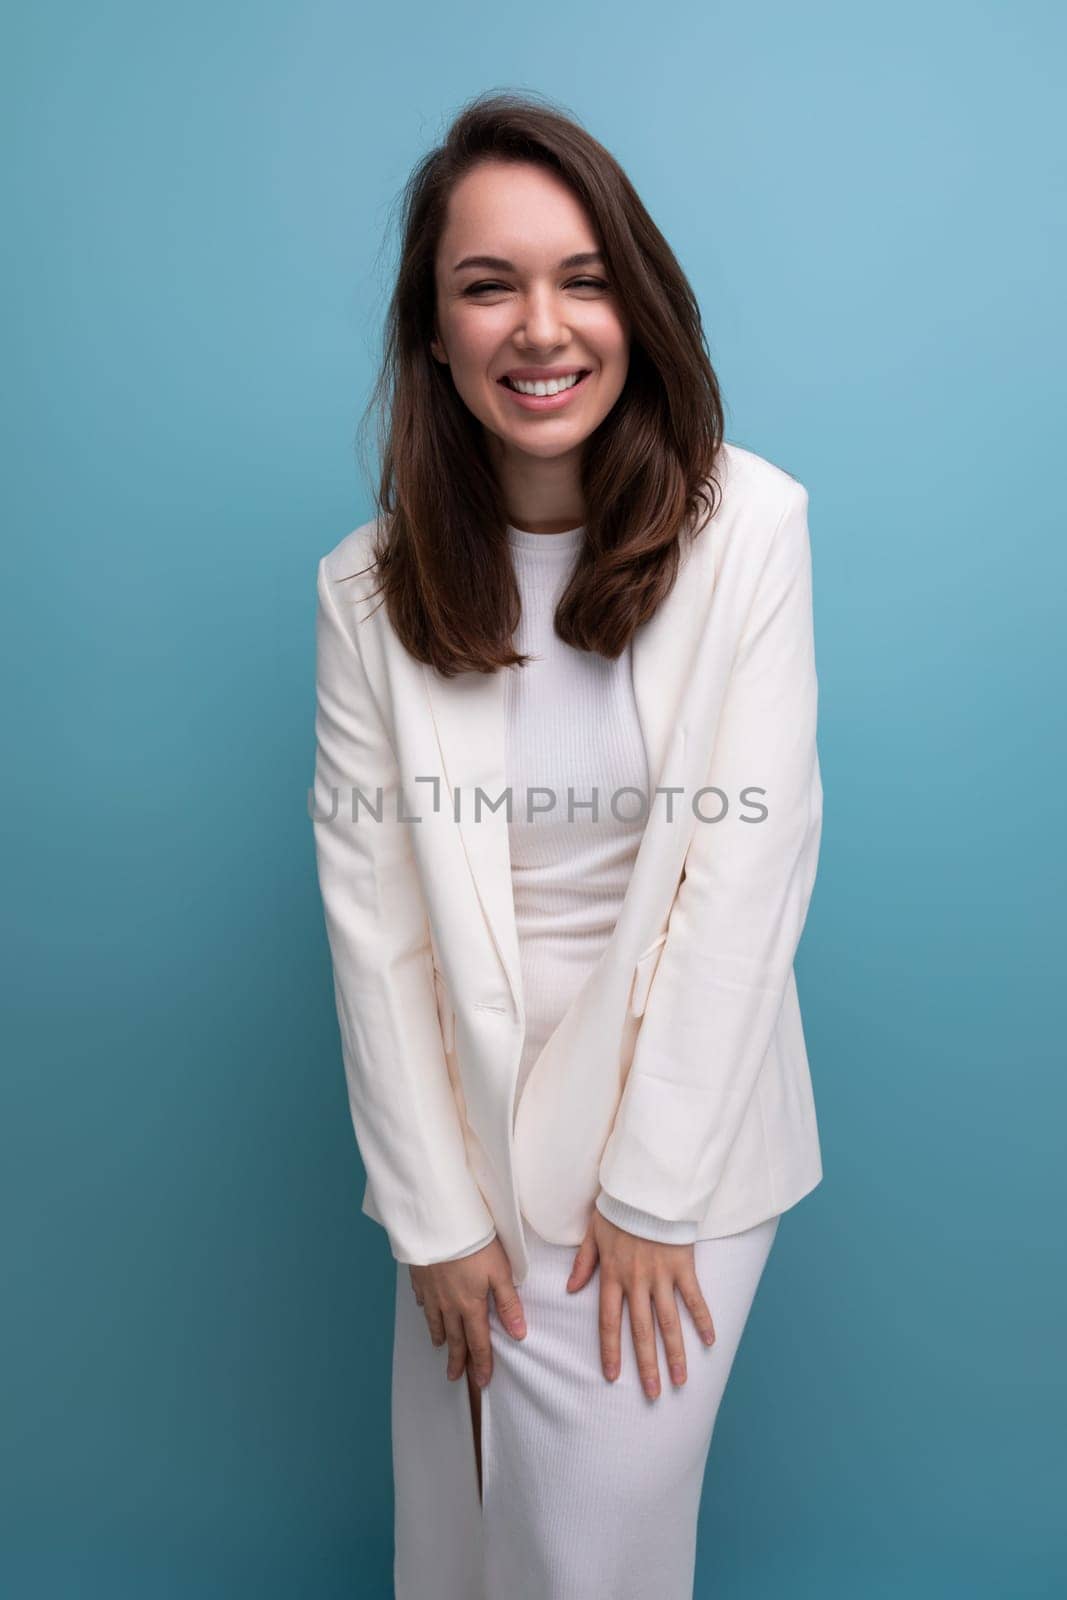 pleasant european brunette young woman in a white dress with cheerful emotions on her face.